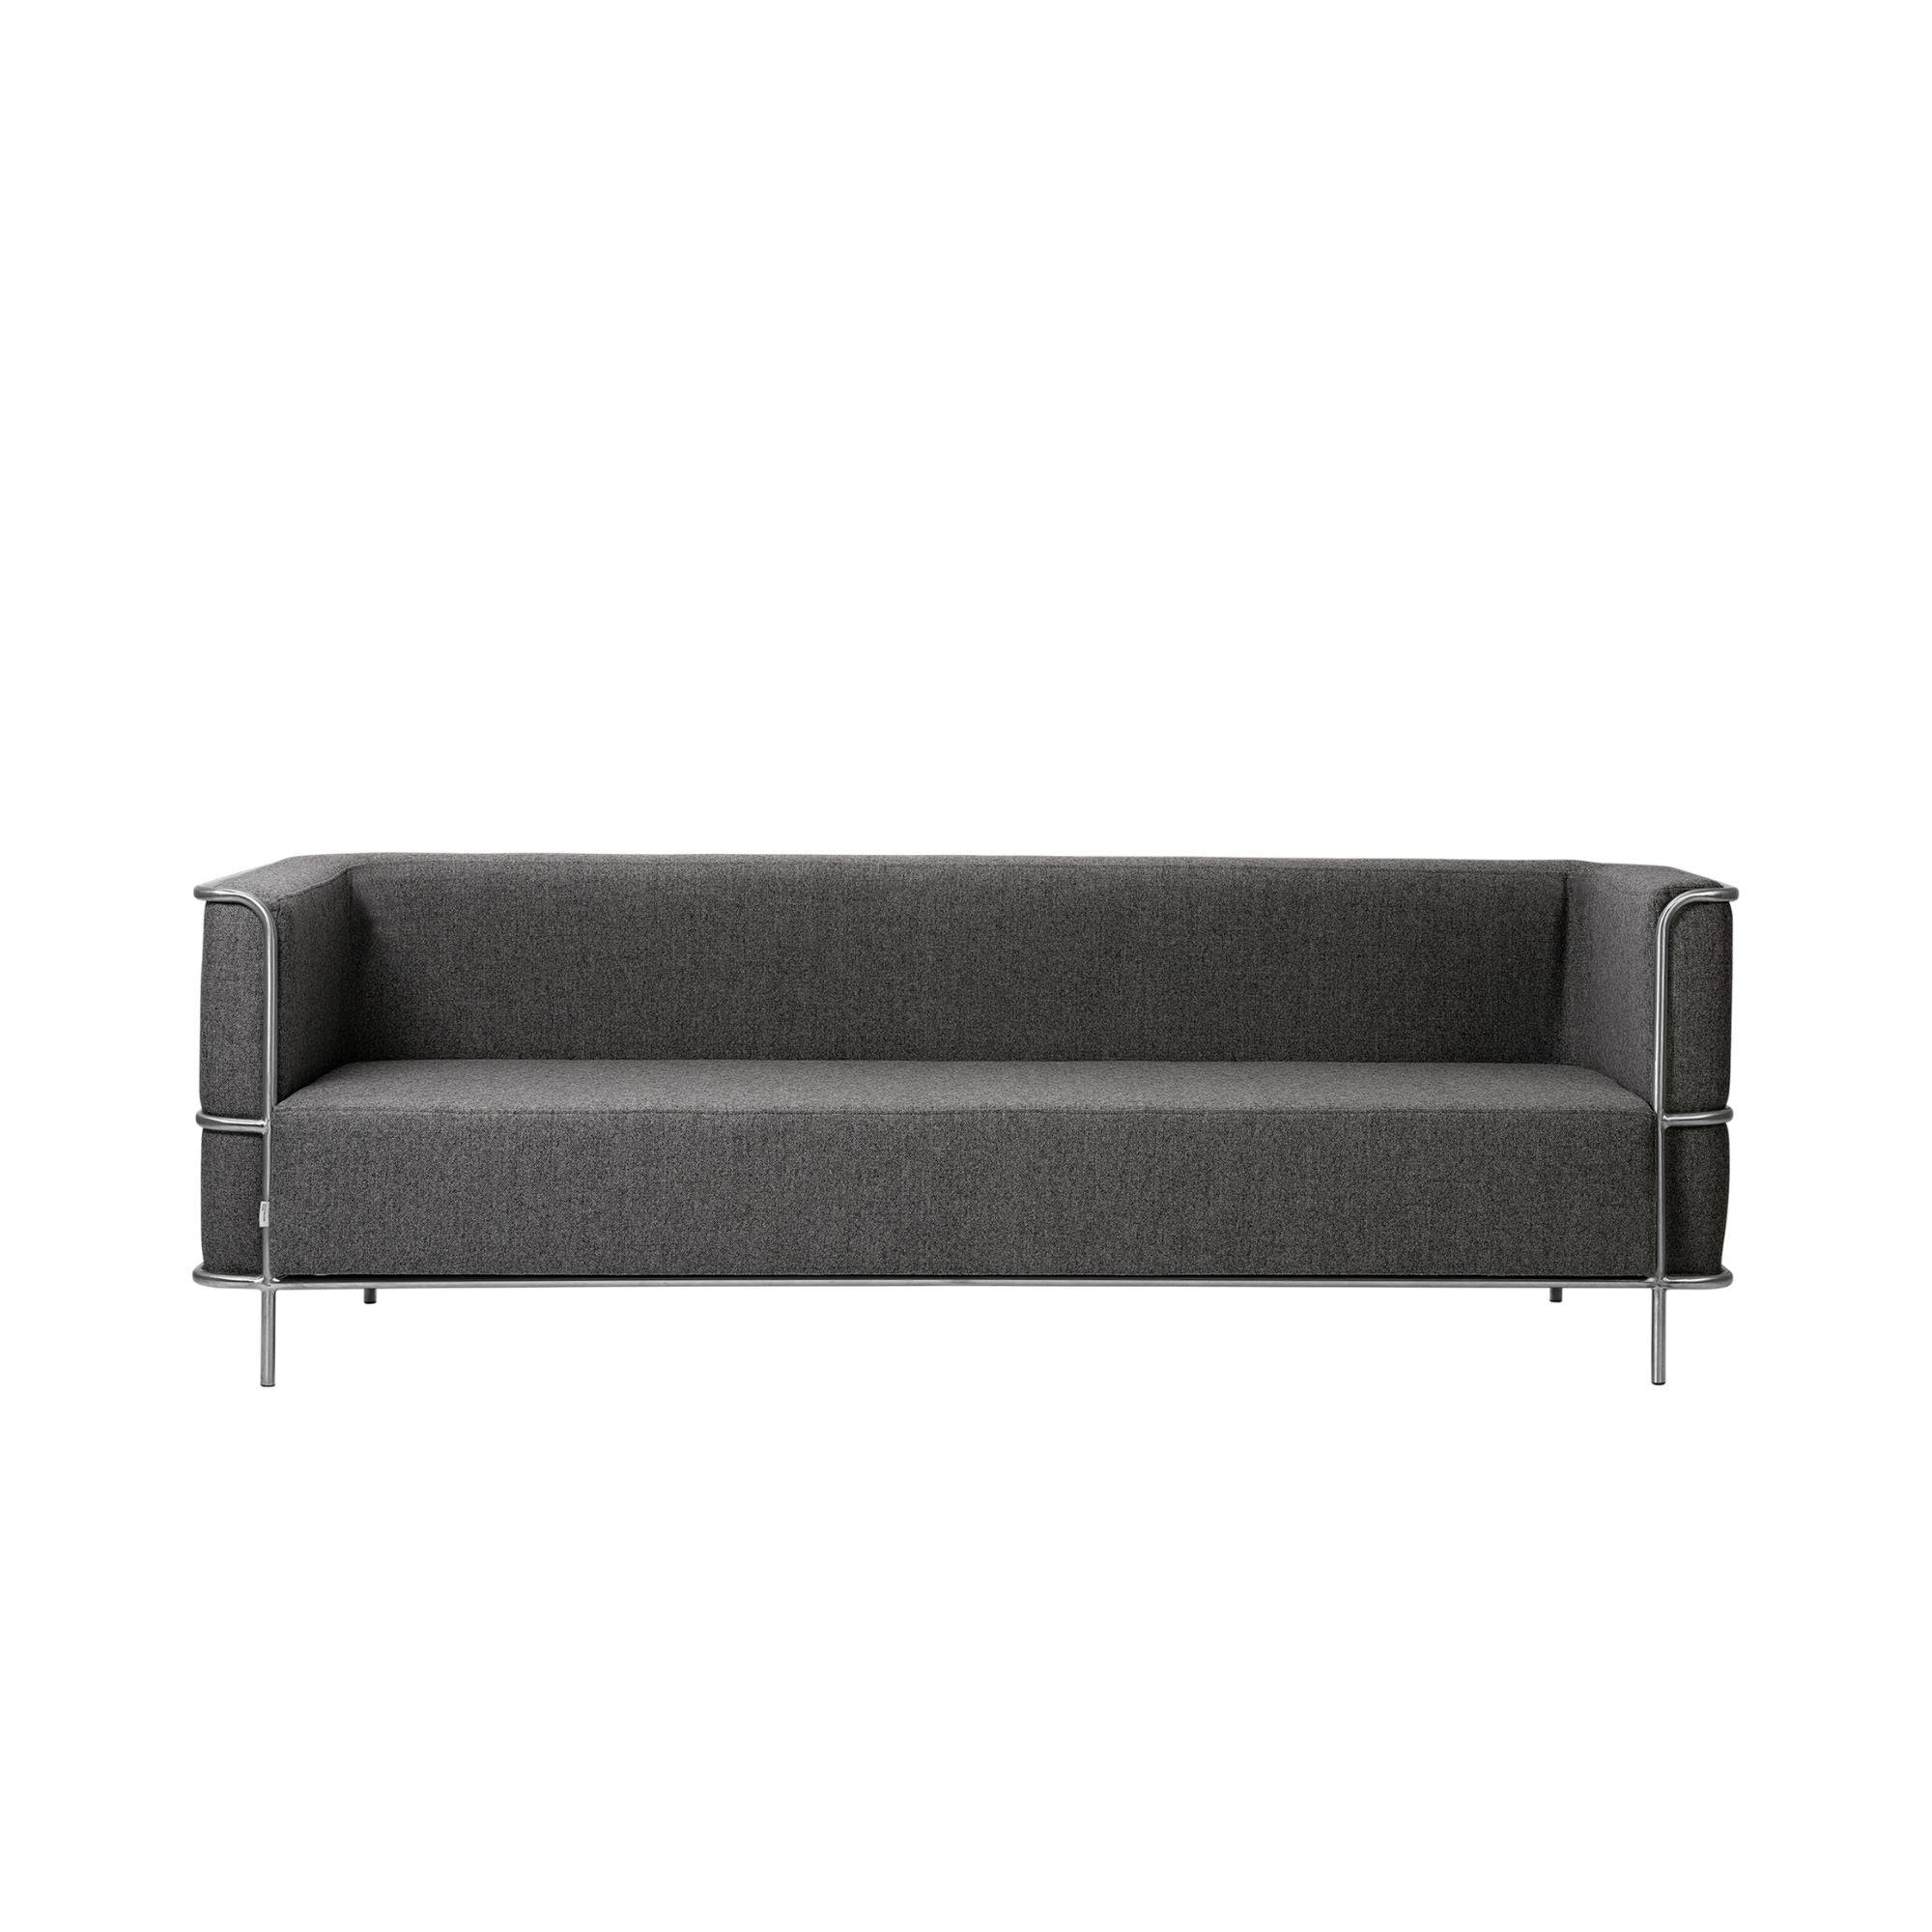 Modernist 3-Seater Sofa - Wool - THAT COOL LIVING